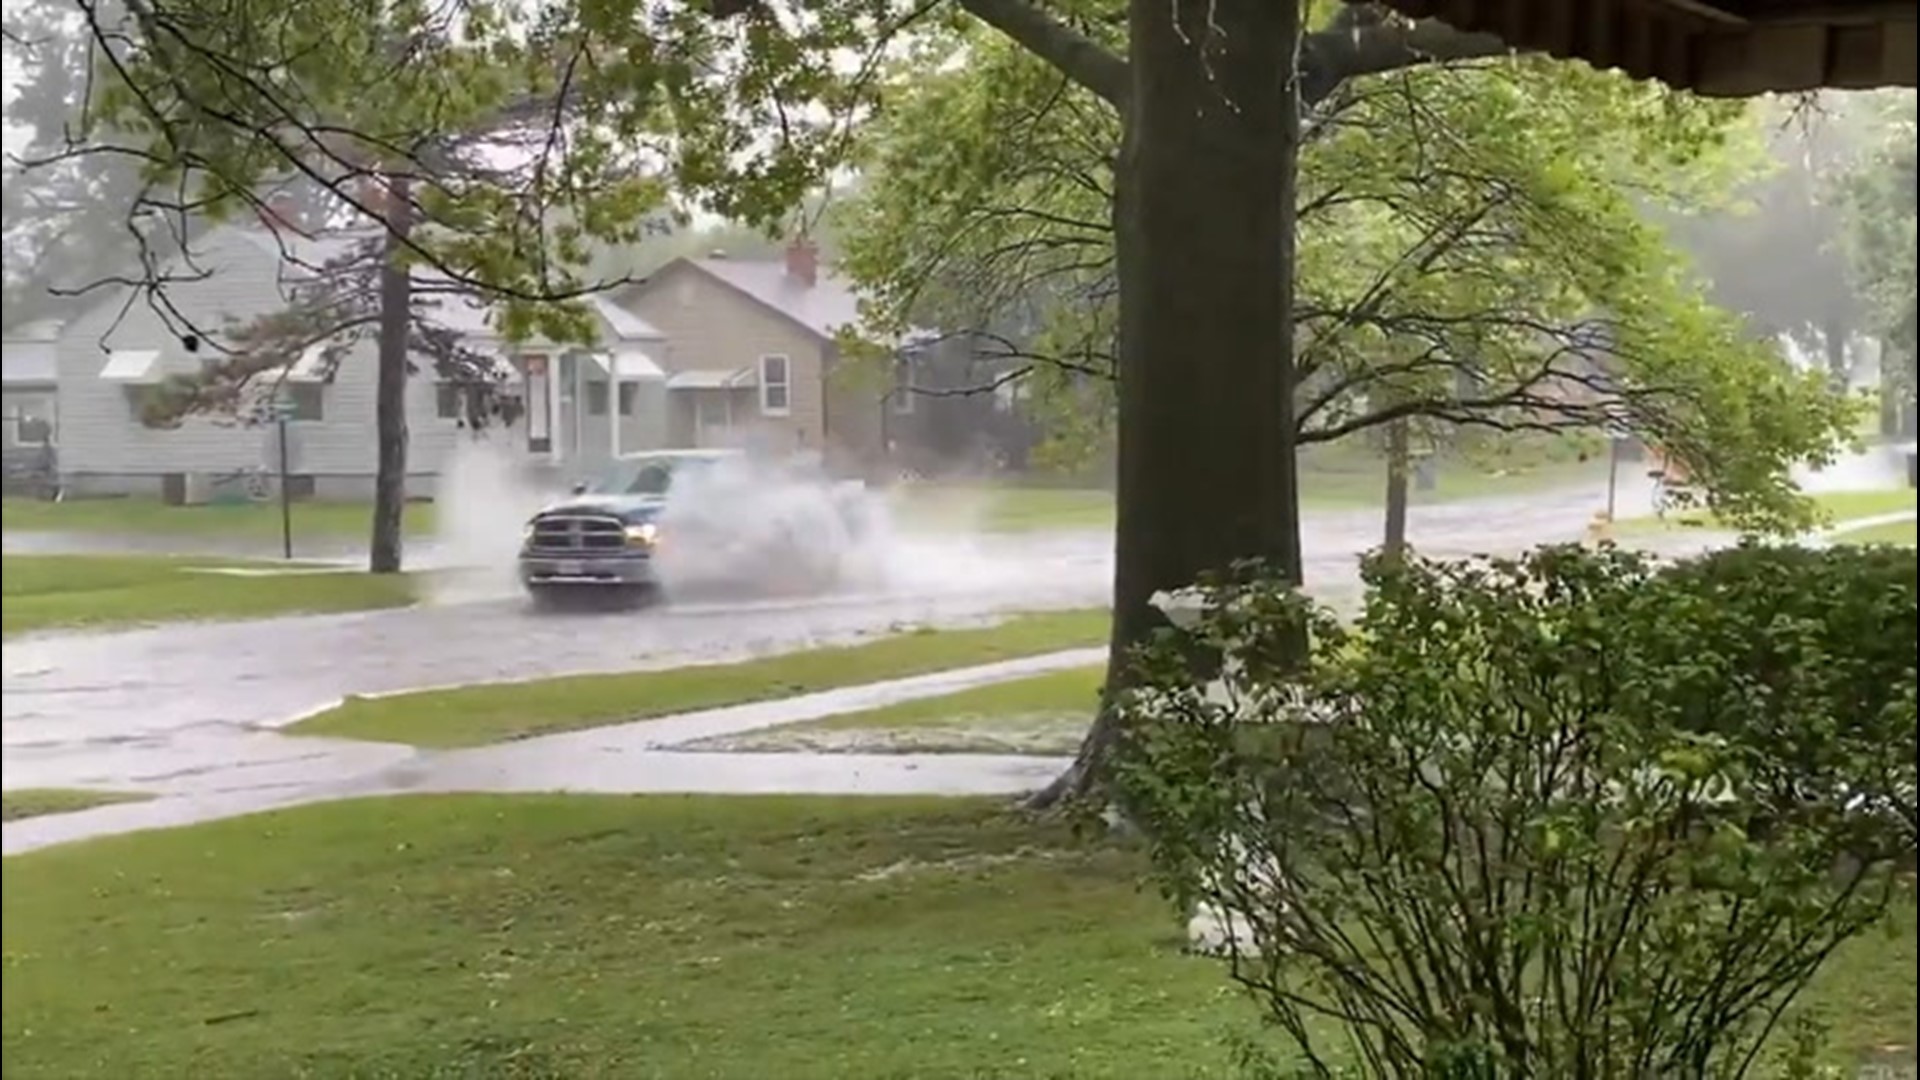 A flash flood watch was in place for East Alton, Illinois, on June 30, after heavy rain flooded streets. Drivers dangerously continued through the flooding on the roads.